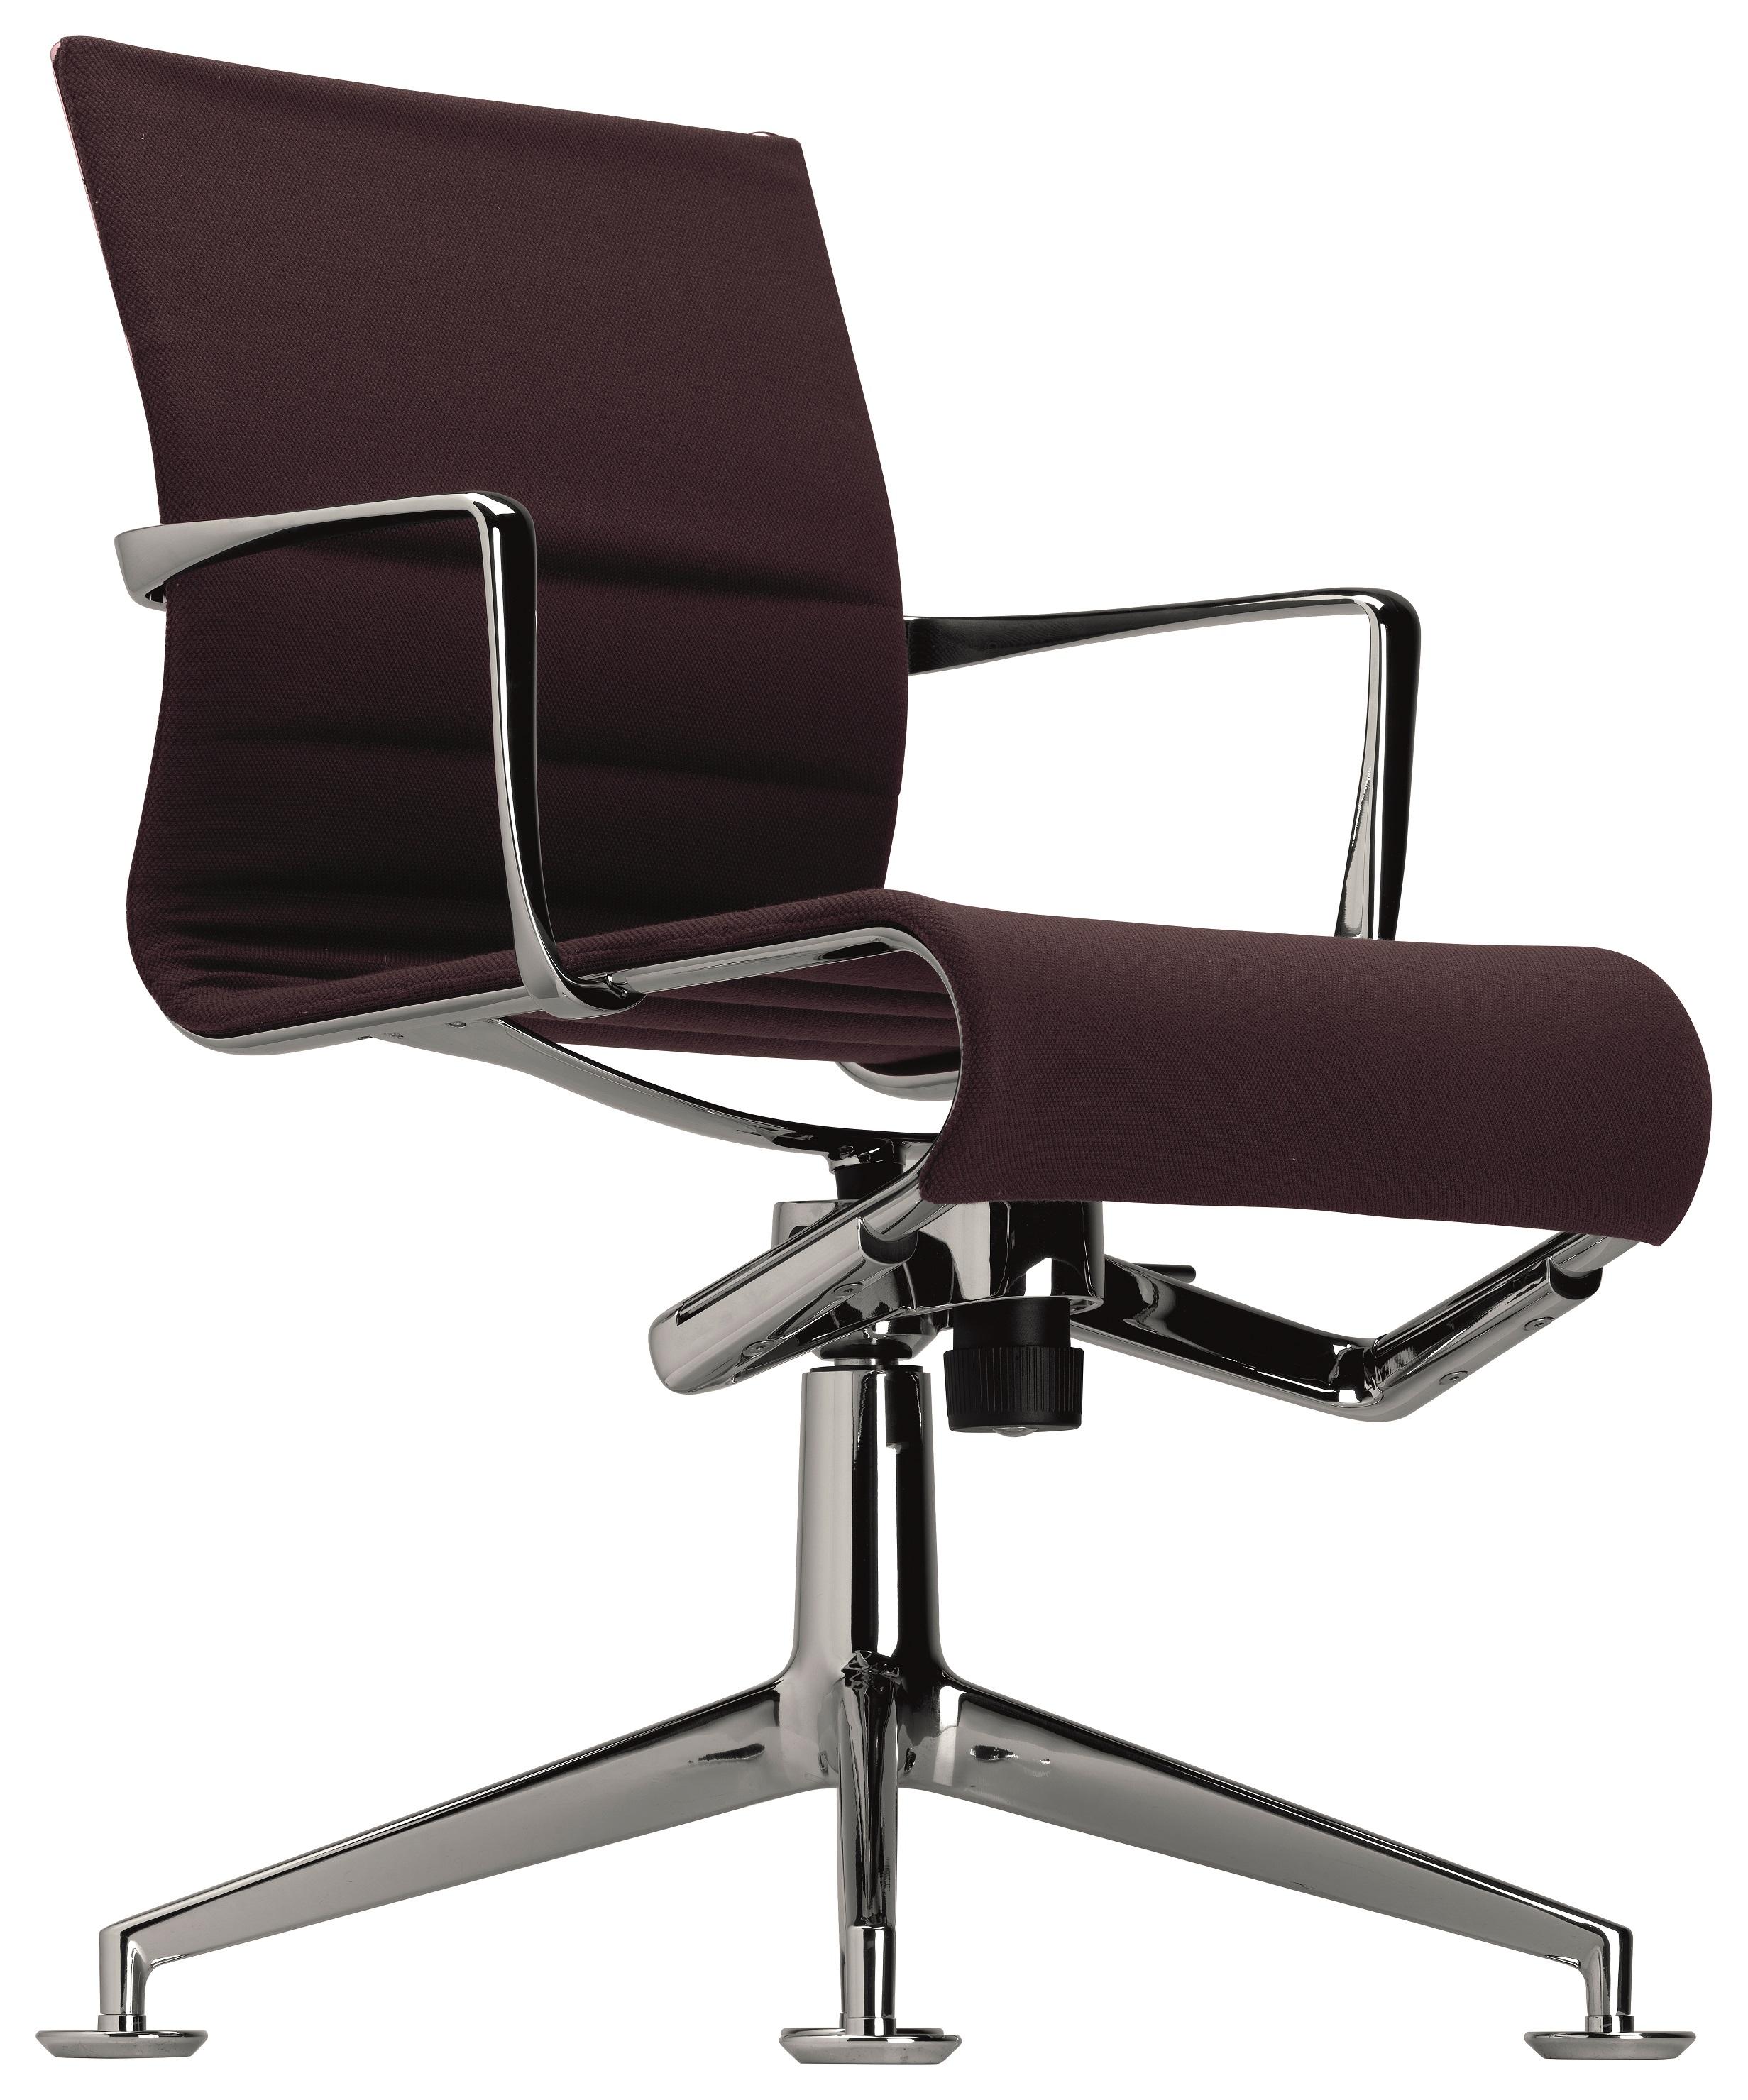 Alias 447 Meetingframe+ Tilt 47 Chair in Purple Seat with Chromed Aluminum Frame by Alberto Meda

Self adjusting swivel chair with arms, with 4-star base with glides and tilting mechanism. Structure made of extruded aluminium profile and die-cast